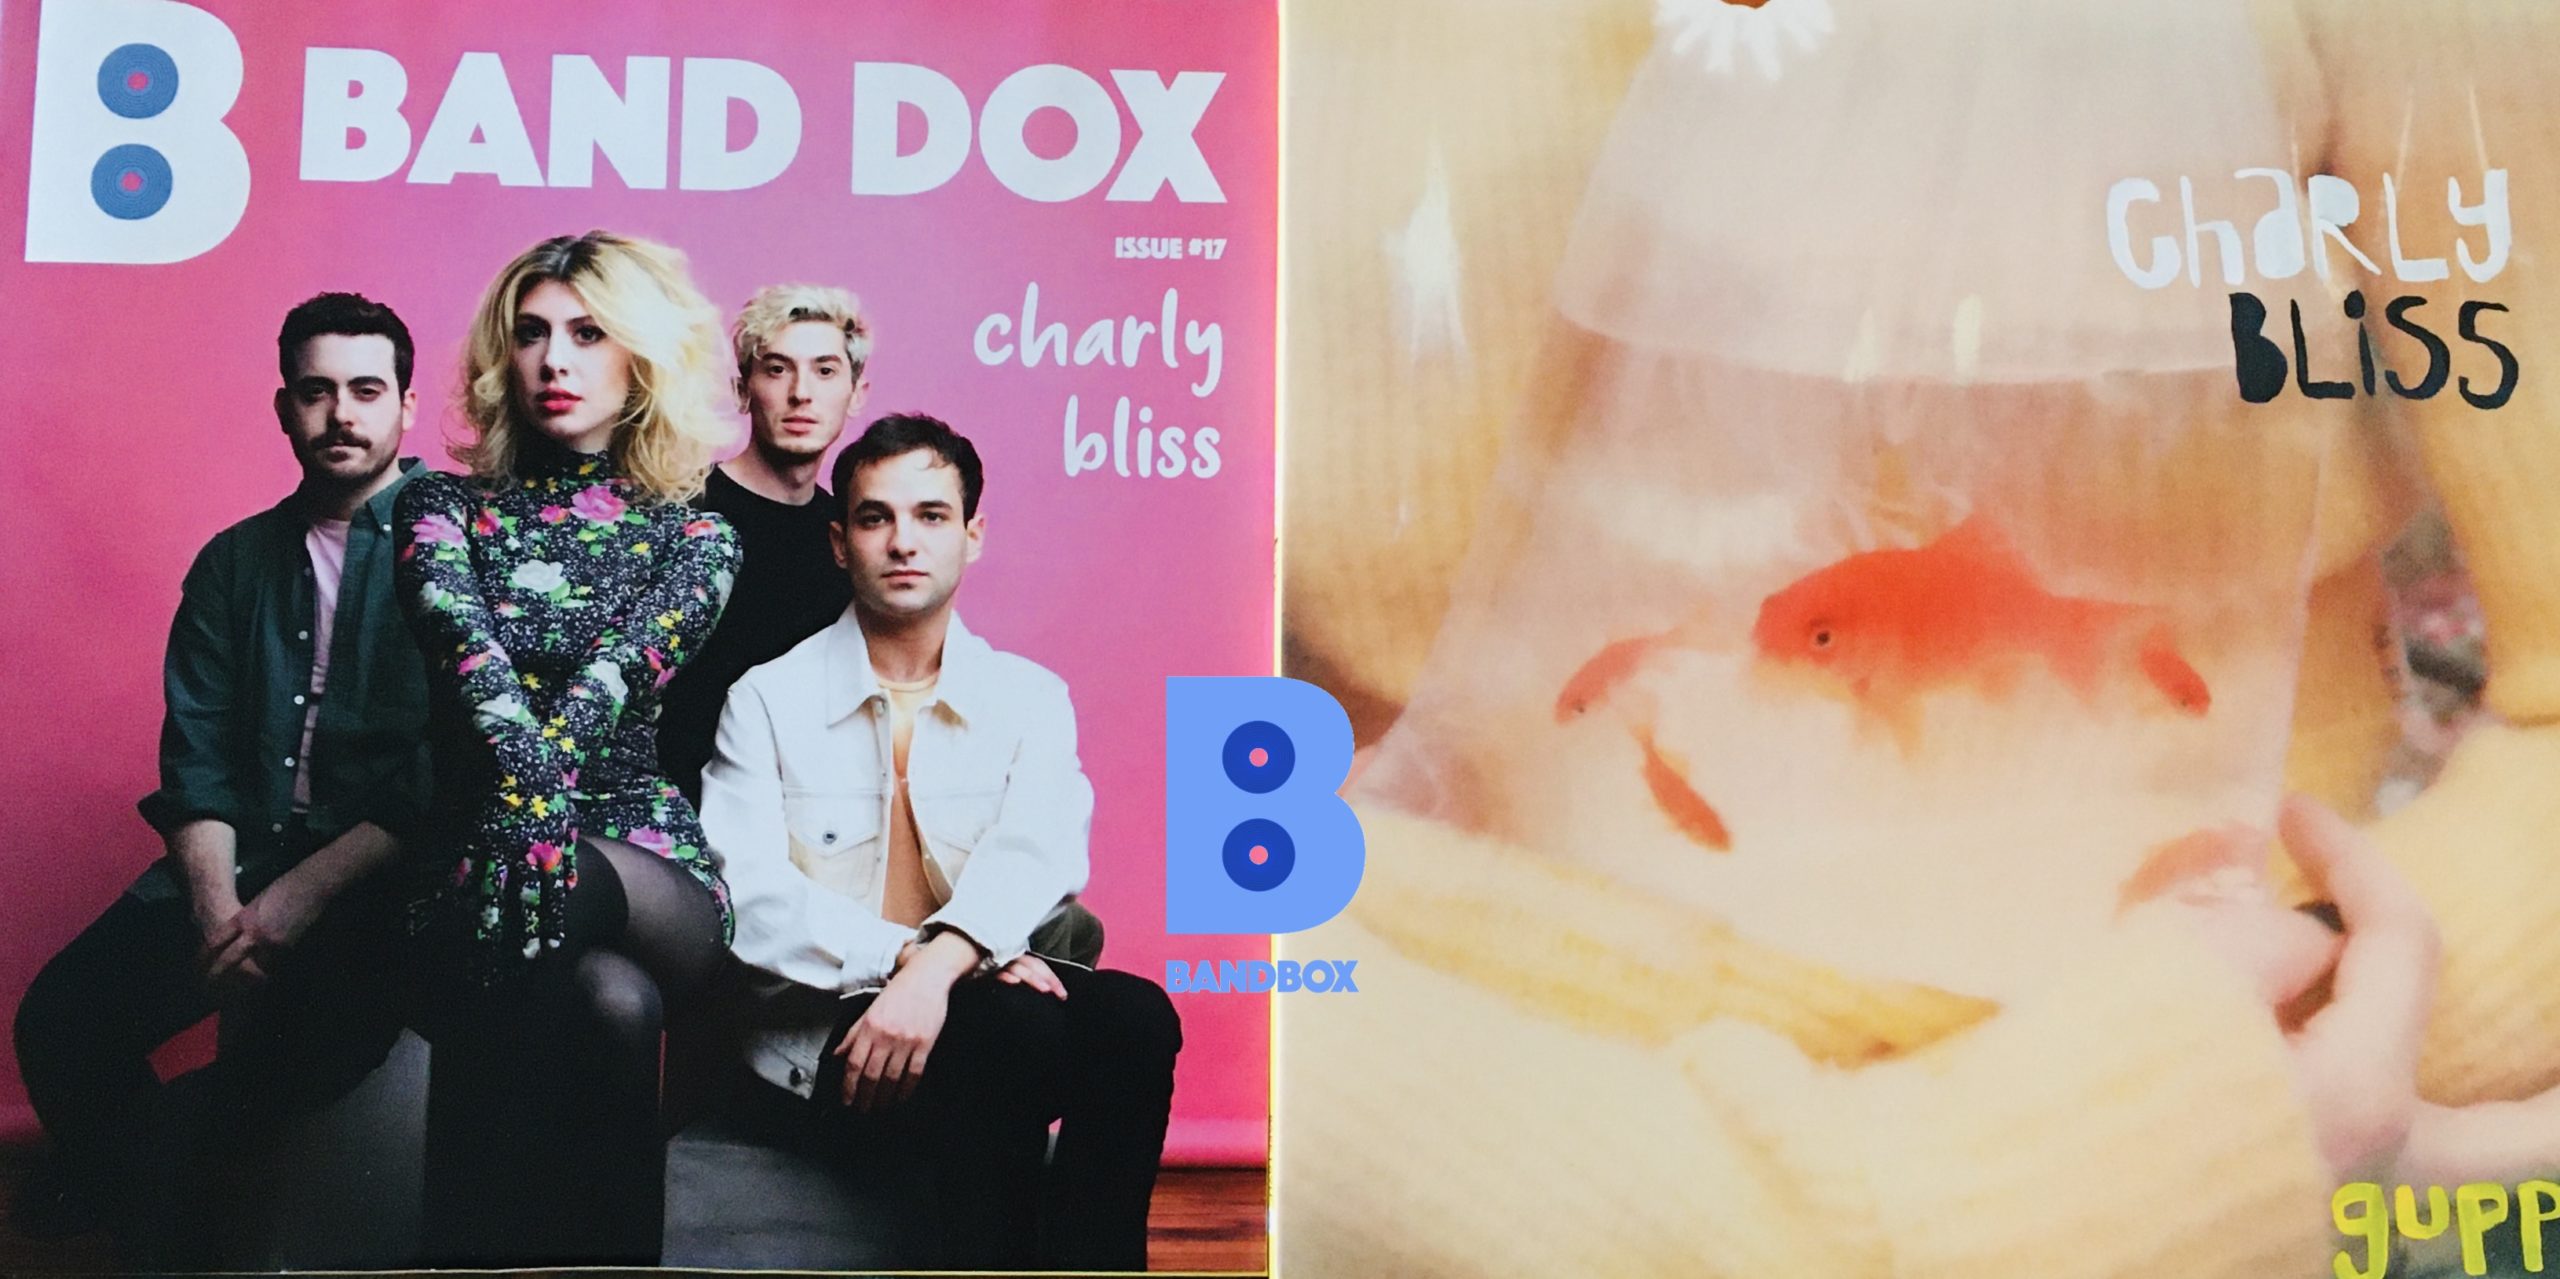 Geek insider, geekinsider, geekinsider. Com,, bandbox unboxed vol. 12 - charly bliss, entertainment